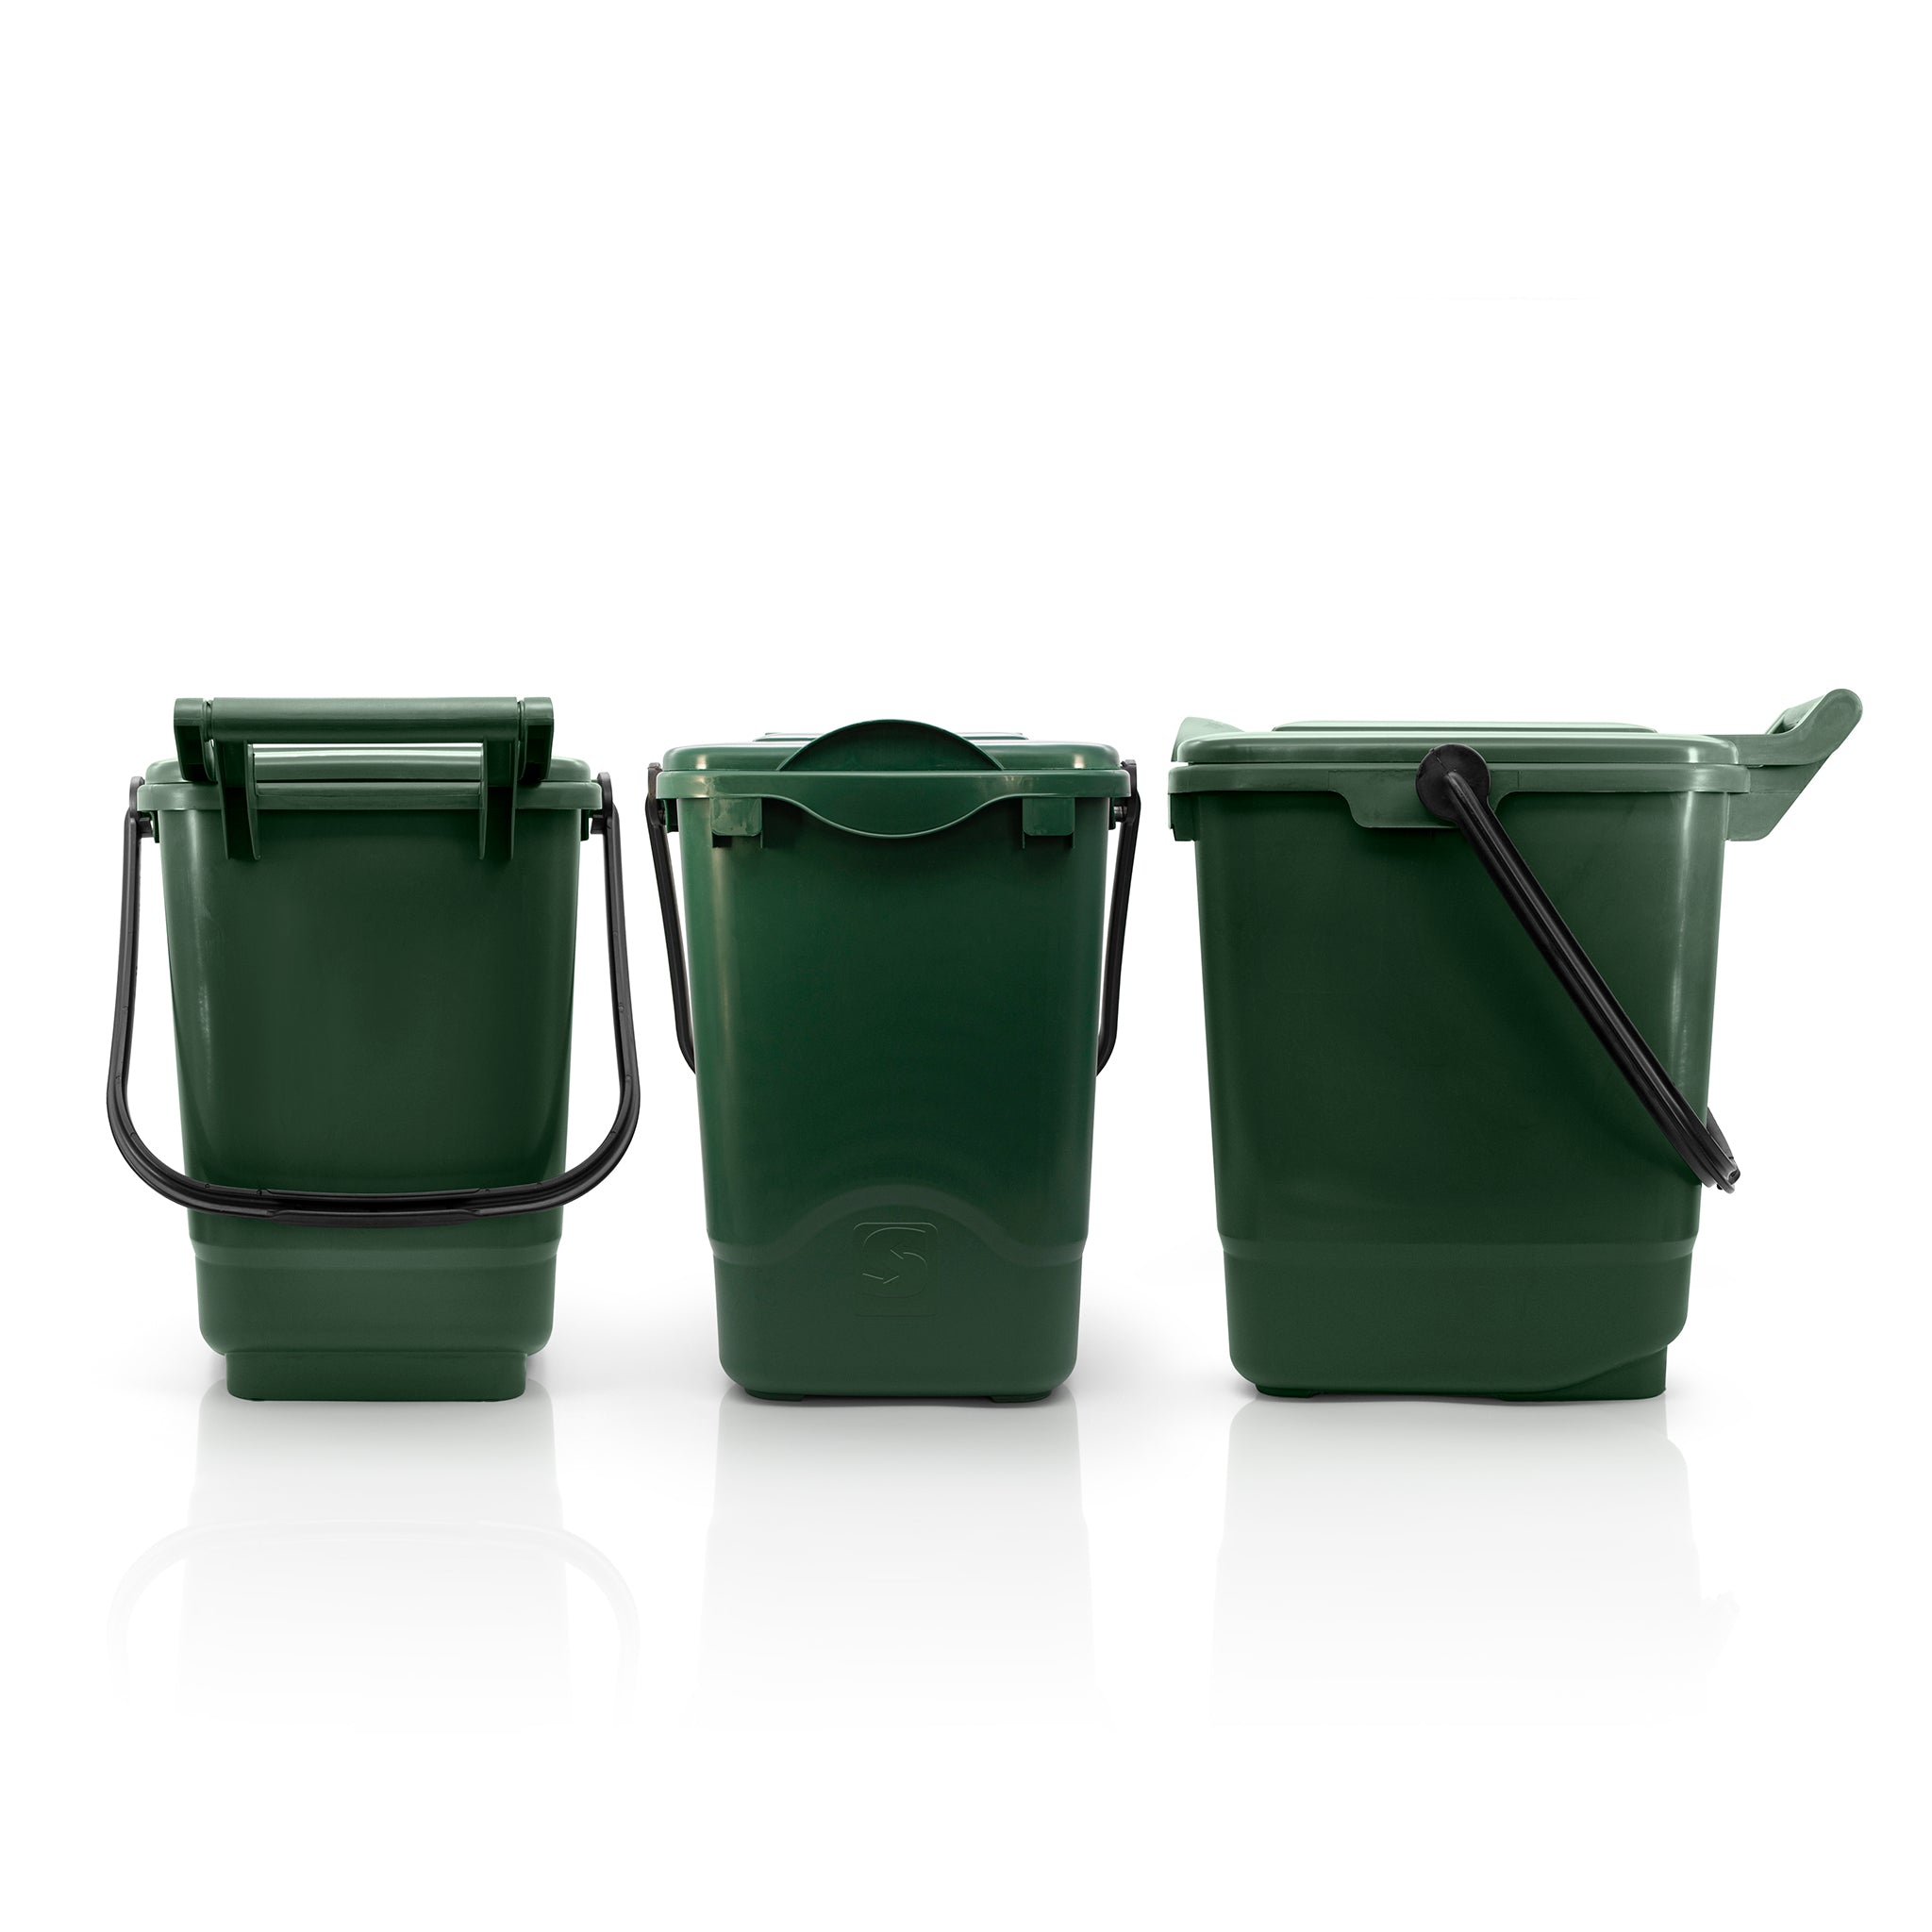 Earth green compost waste bin with locking lid made from recycled plastic